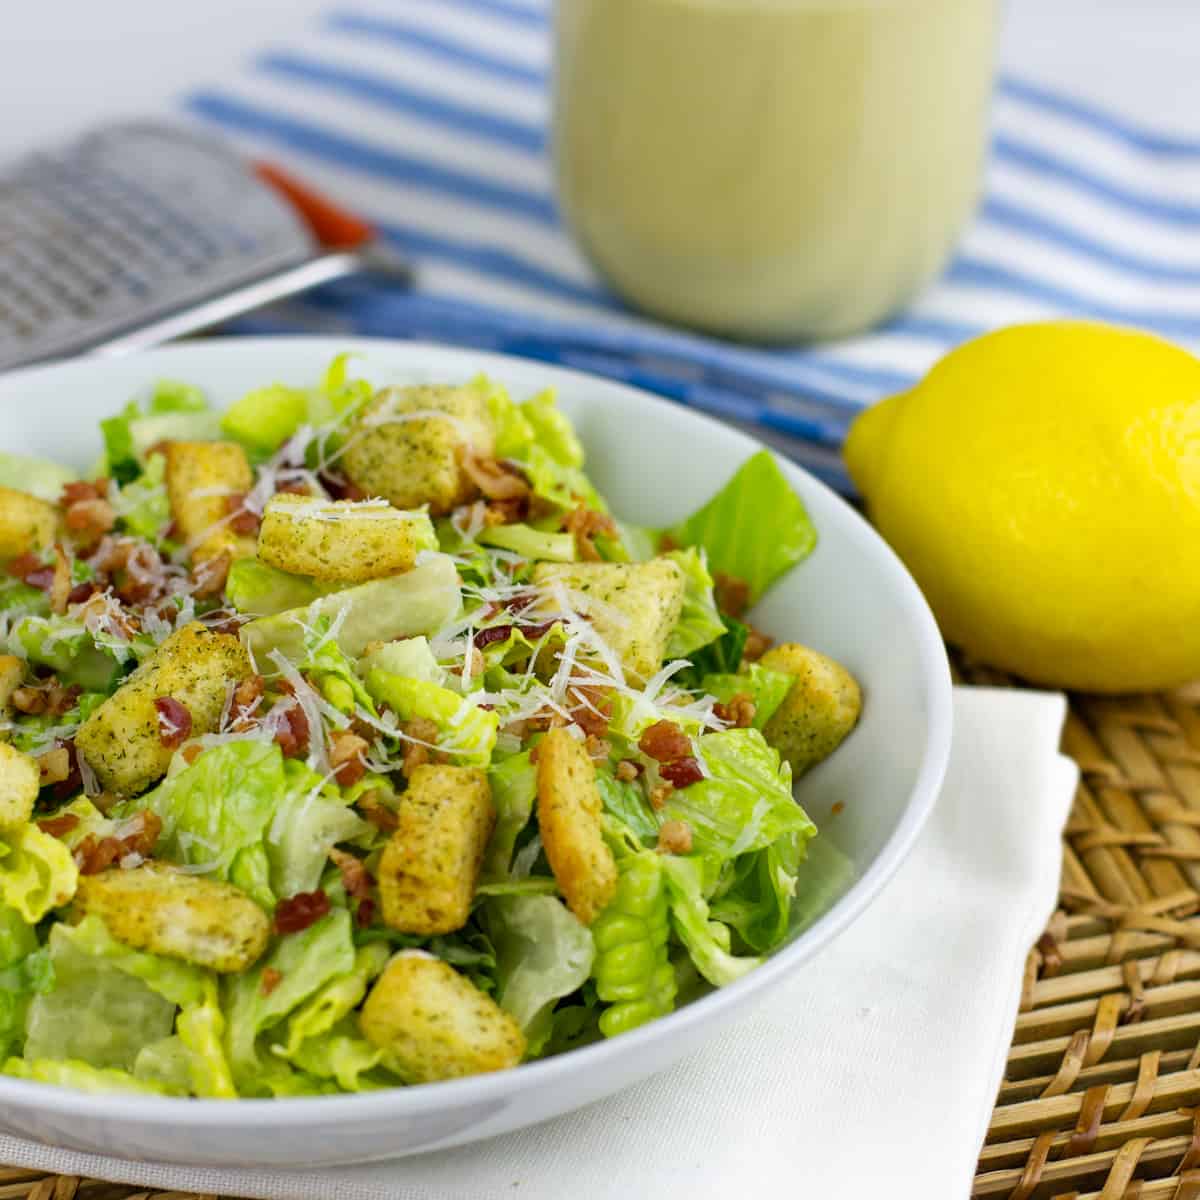 A fresh salad with bacon and croutons.